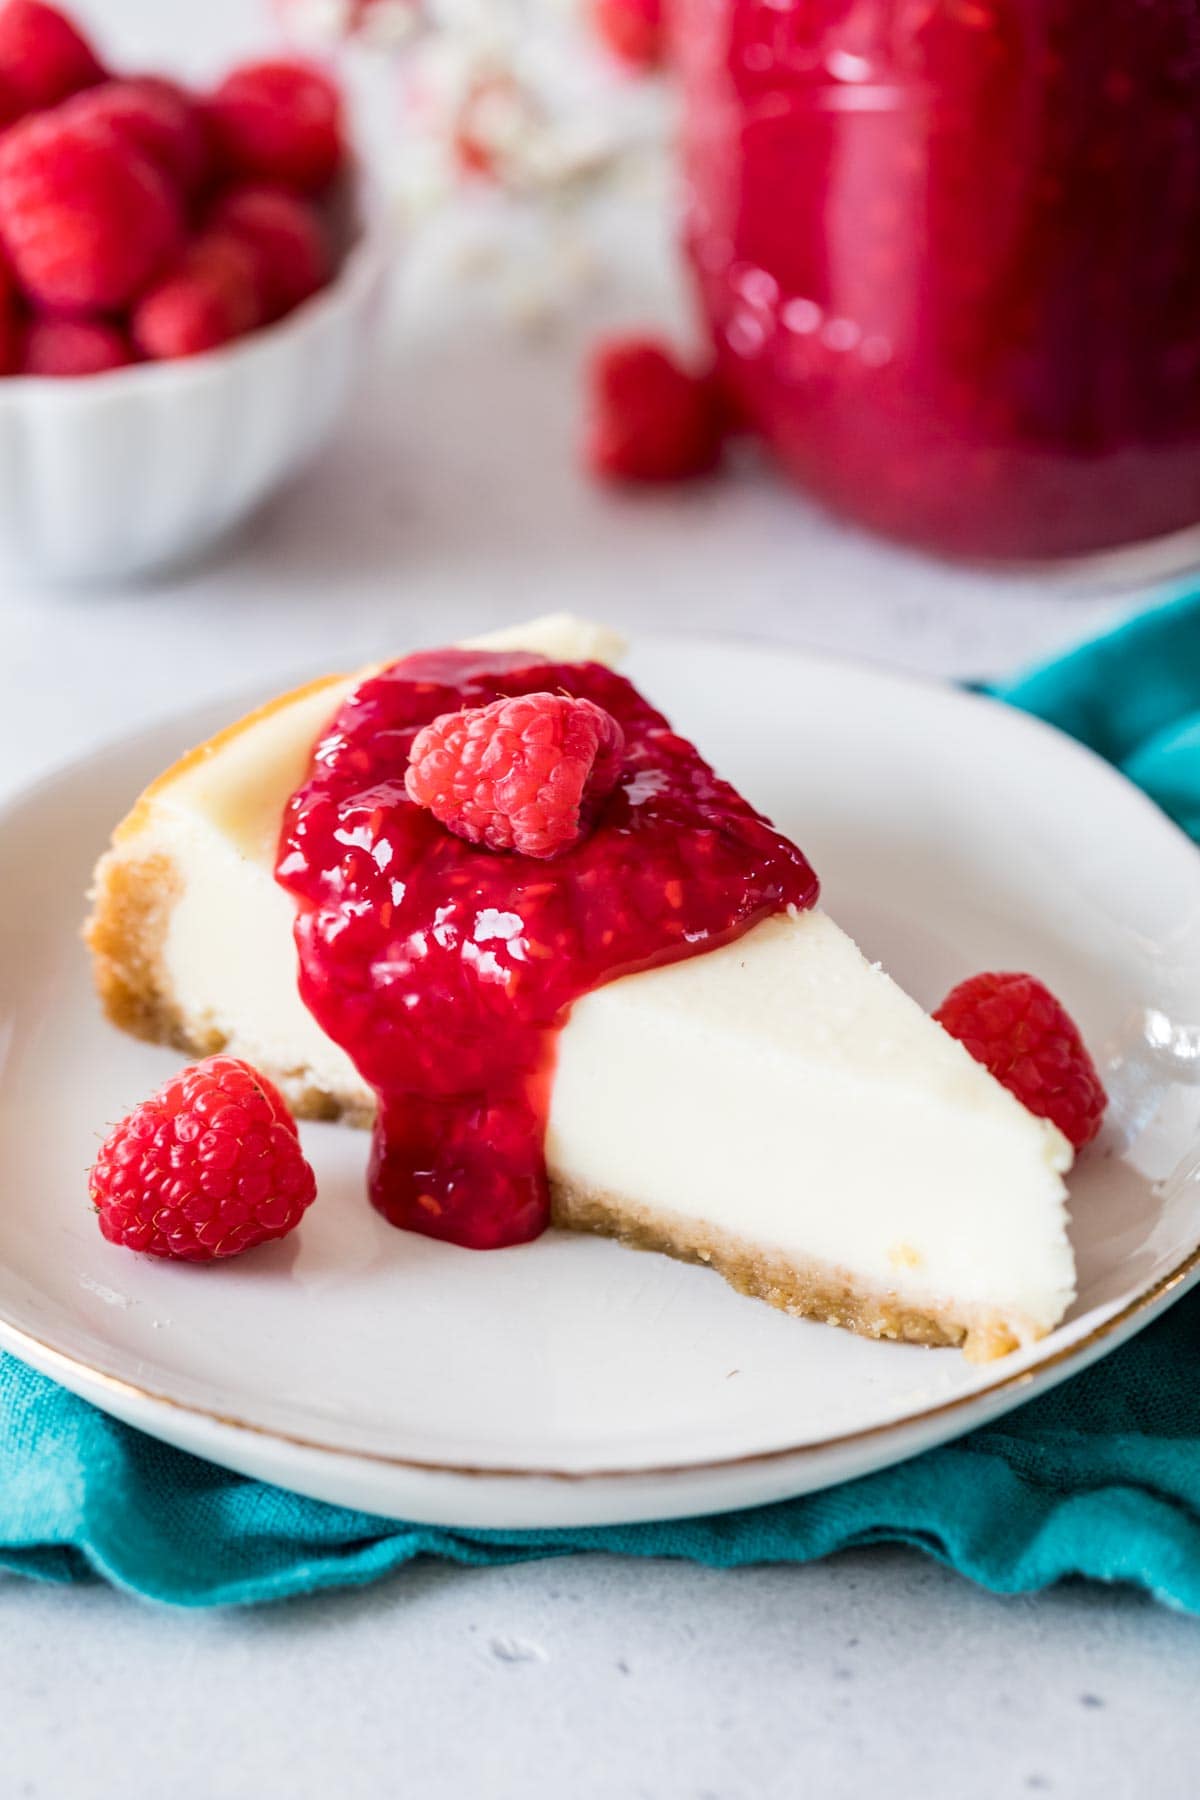 Slice of cheesecake topped with a red sauce and fresh raspberries.